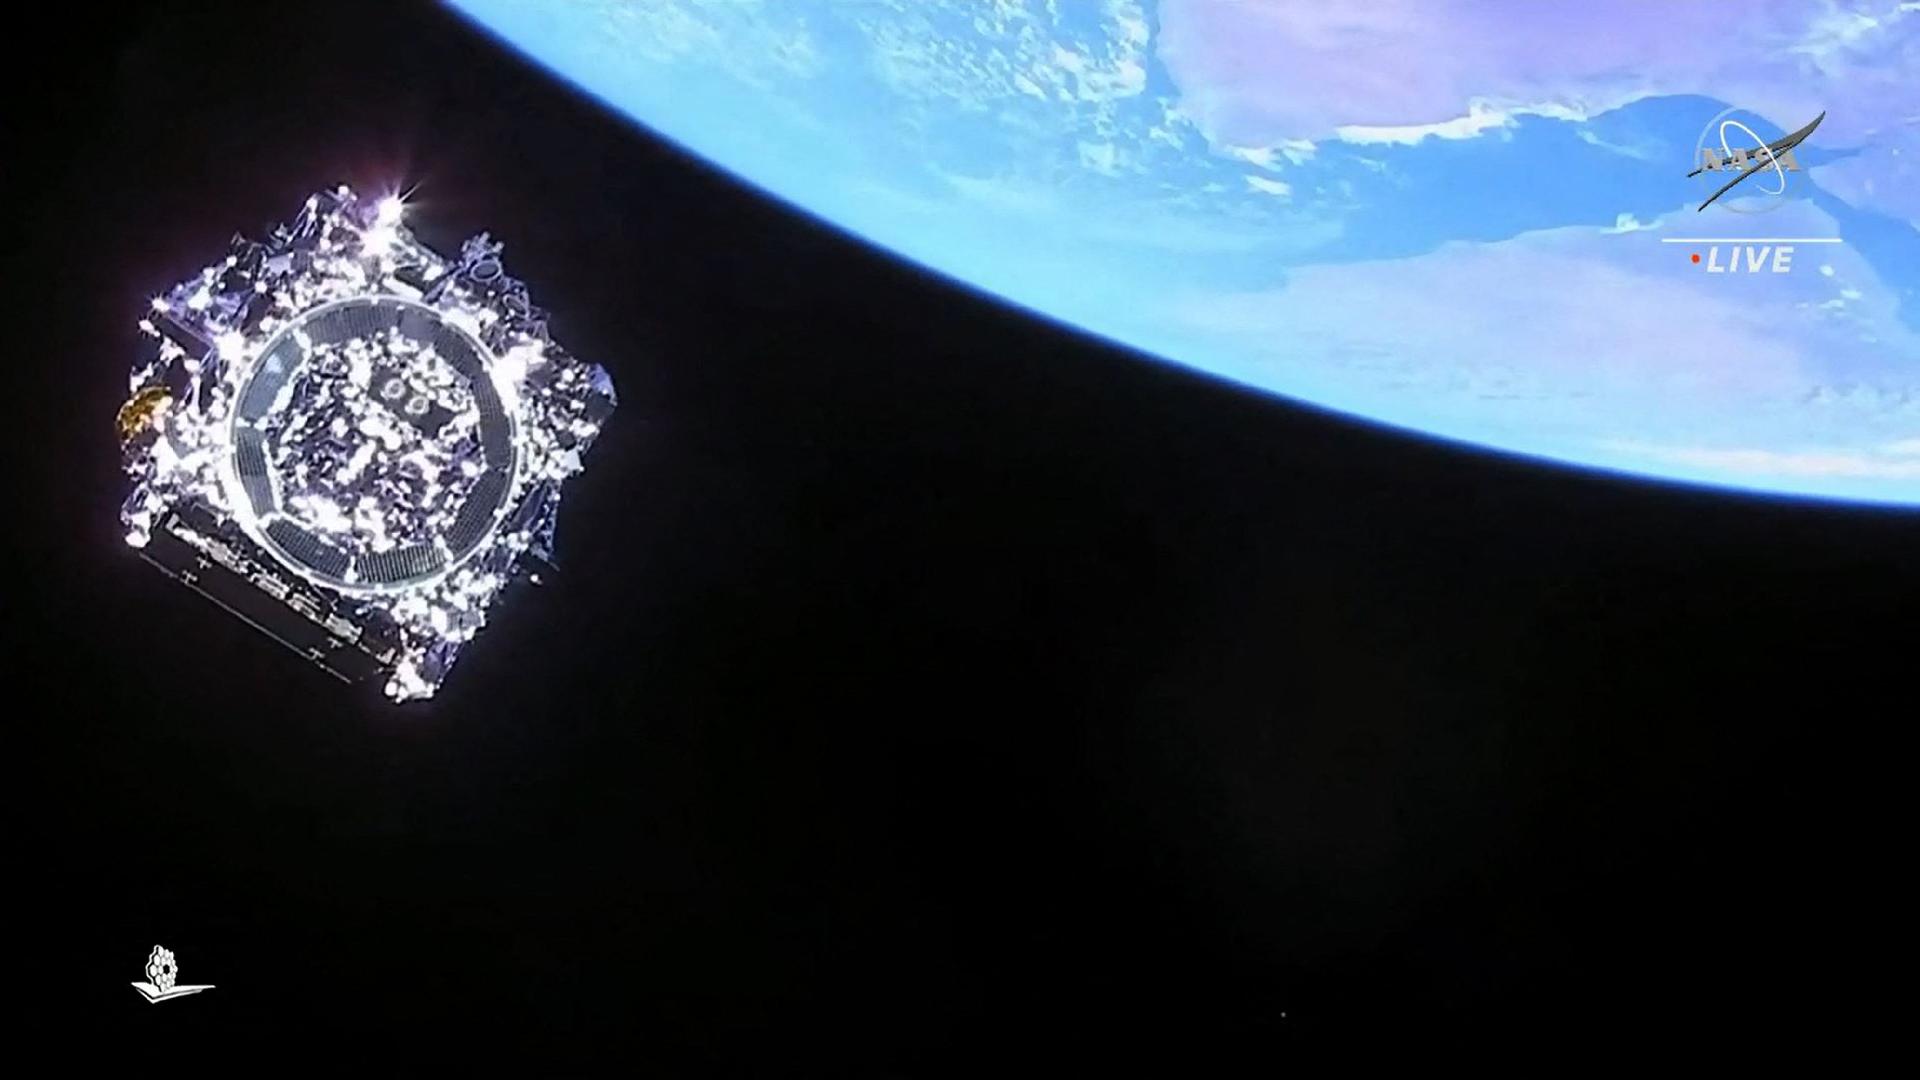 Image captured from NASA's live stream shows the James Webb Space Telescope separating from the Ariane 5 rocket.